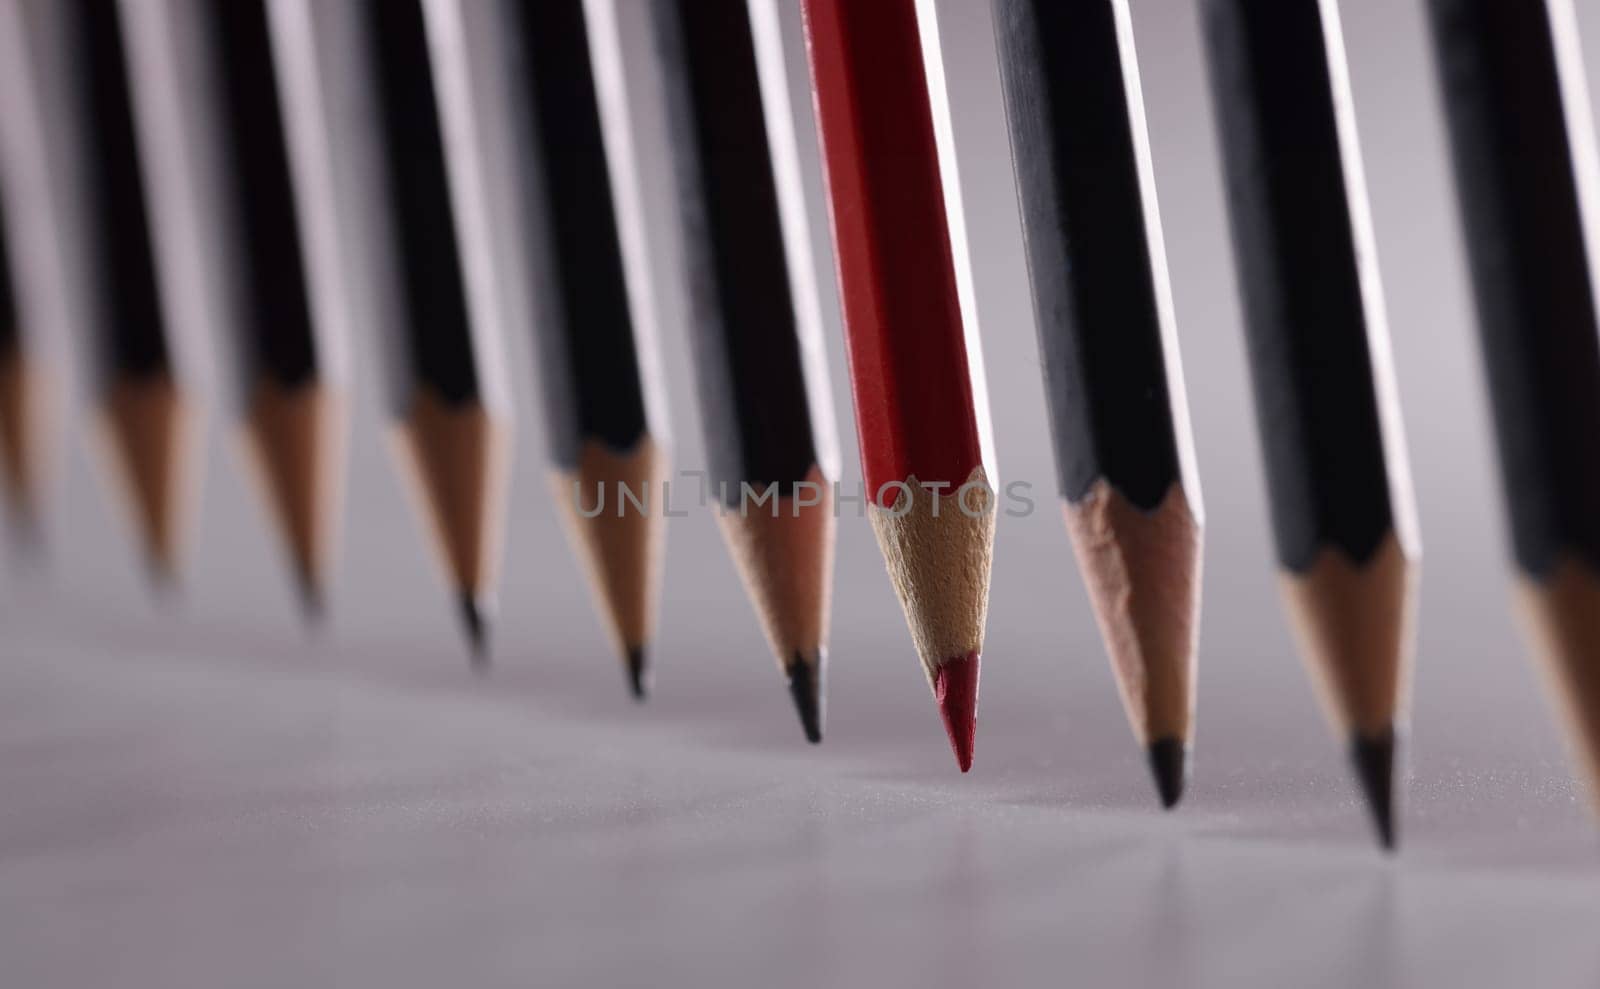 Black pencils in the center with red. Leadership uniqueness and business success concept